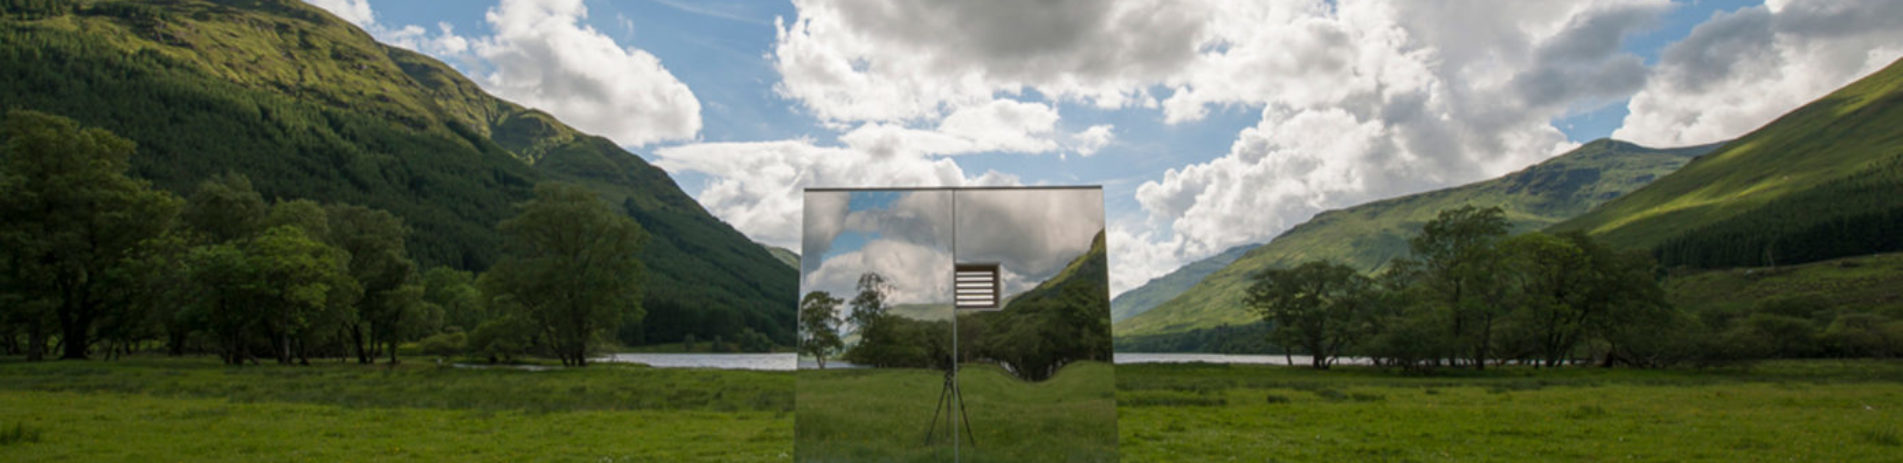 lookout-mirrored-cabin-scenic-art-installation-with-loch-doine-in-the-distance-and-surrounded-by-greenery